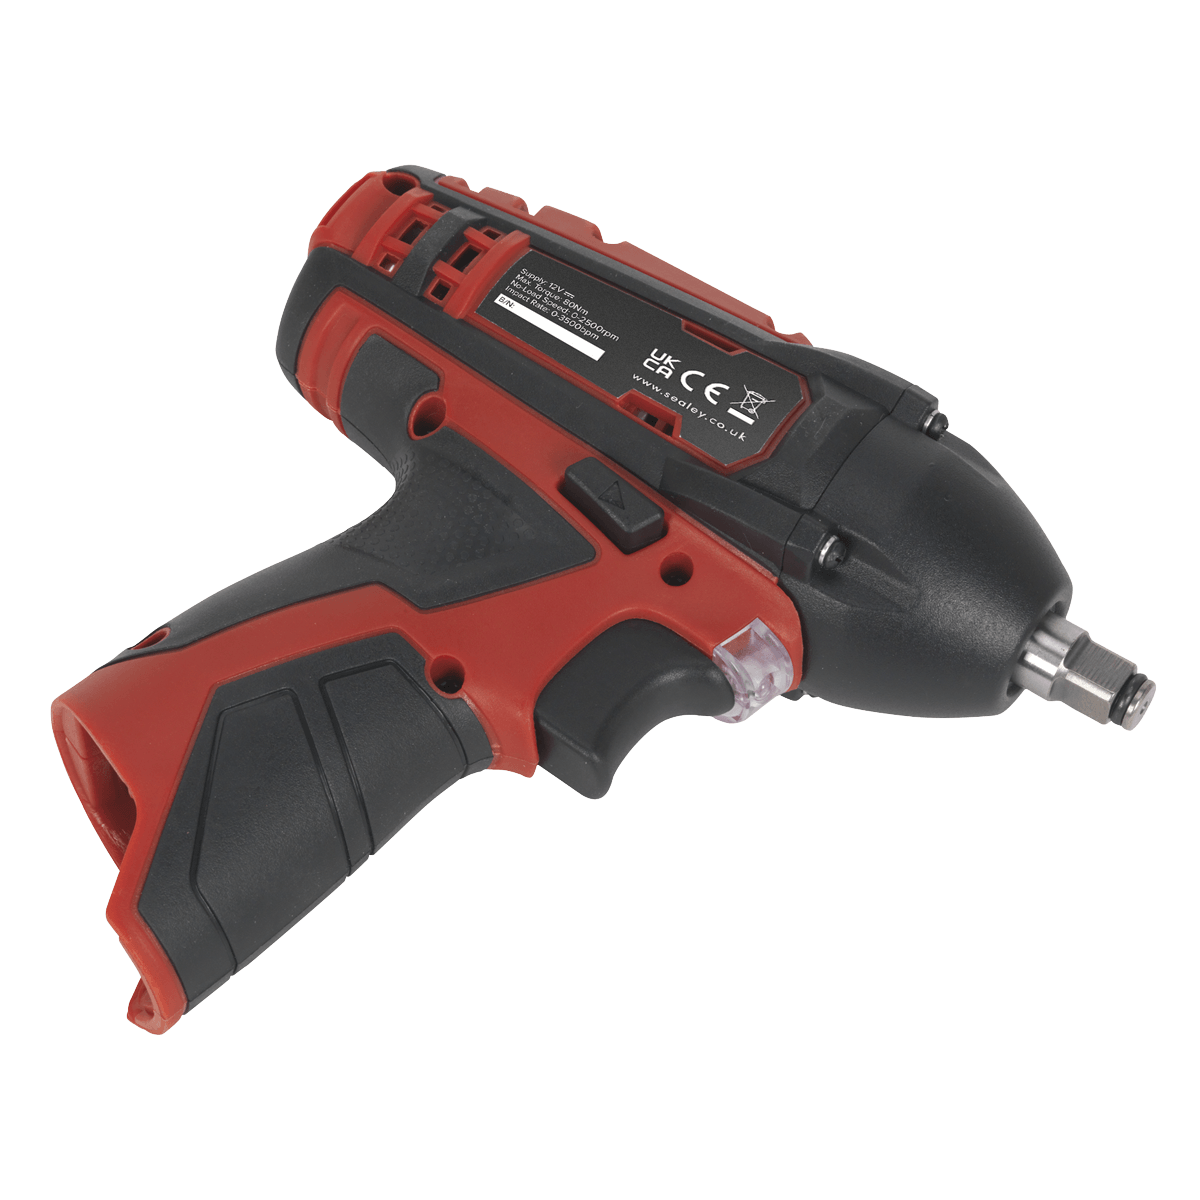 Sealey Cordless Impact Wrench 3/8"Sq Drive 12V SV12 Series - Body Only CP1204 - Tools 2U Direct SW